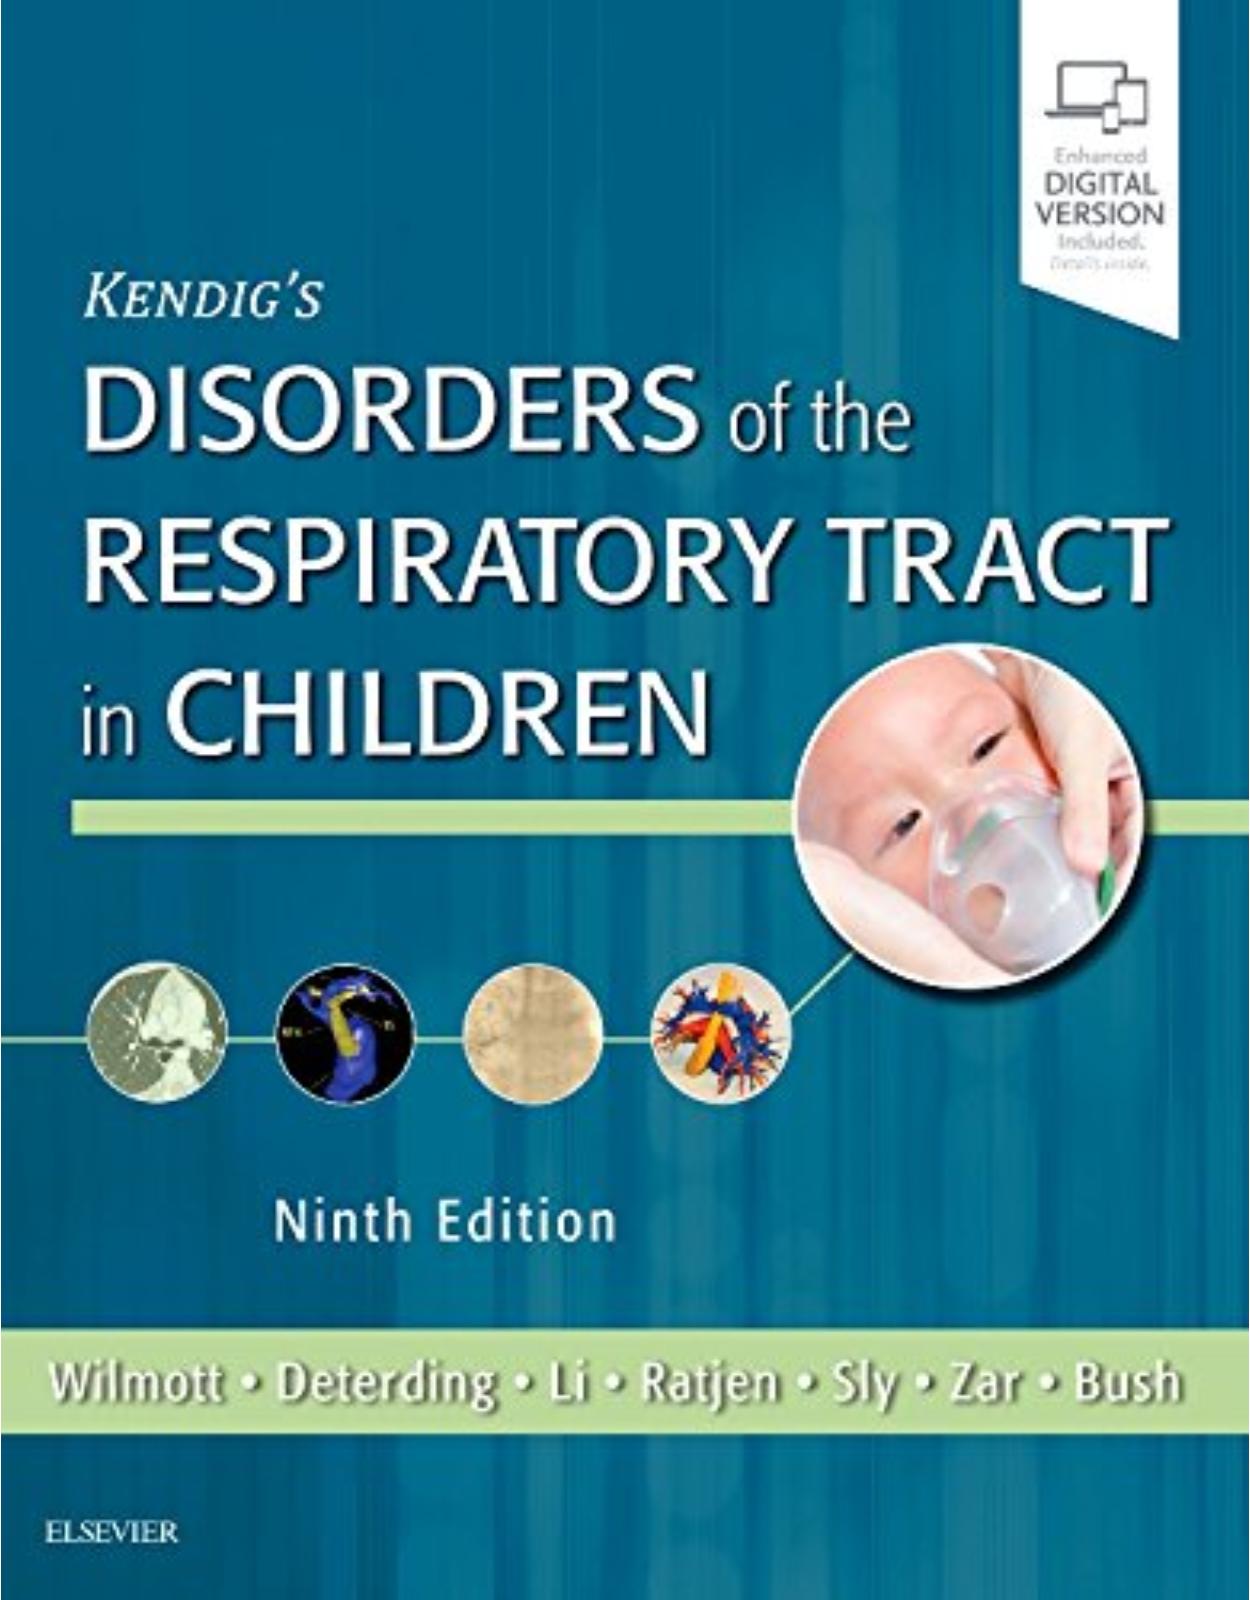 Kendig’s Disorders of the Respiratory Tract in Children, 9e